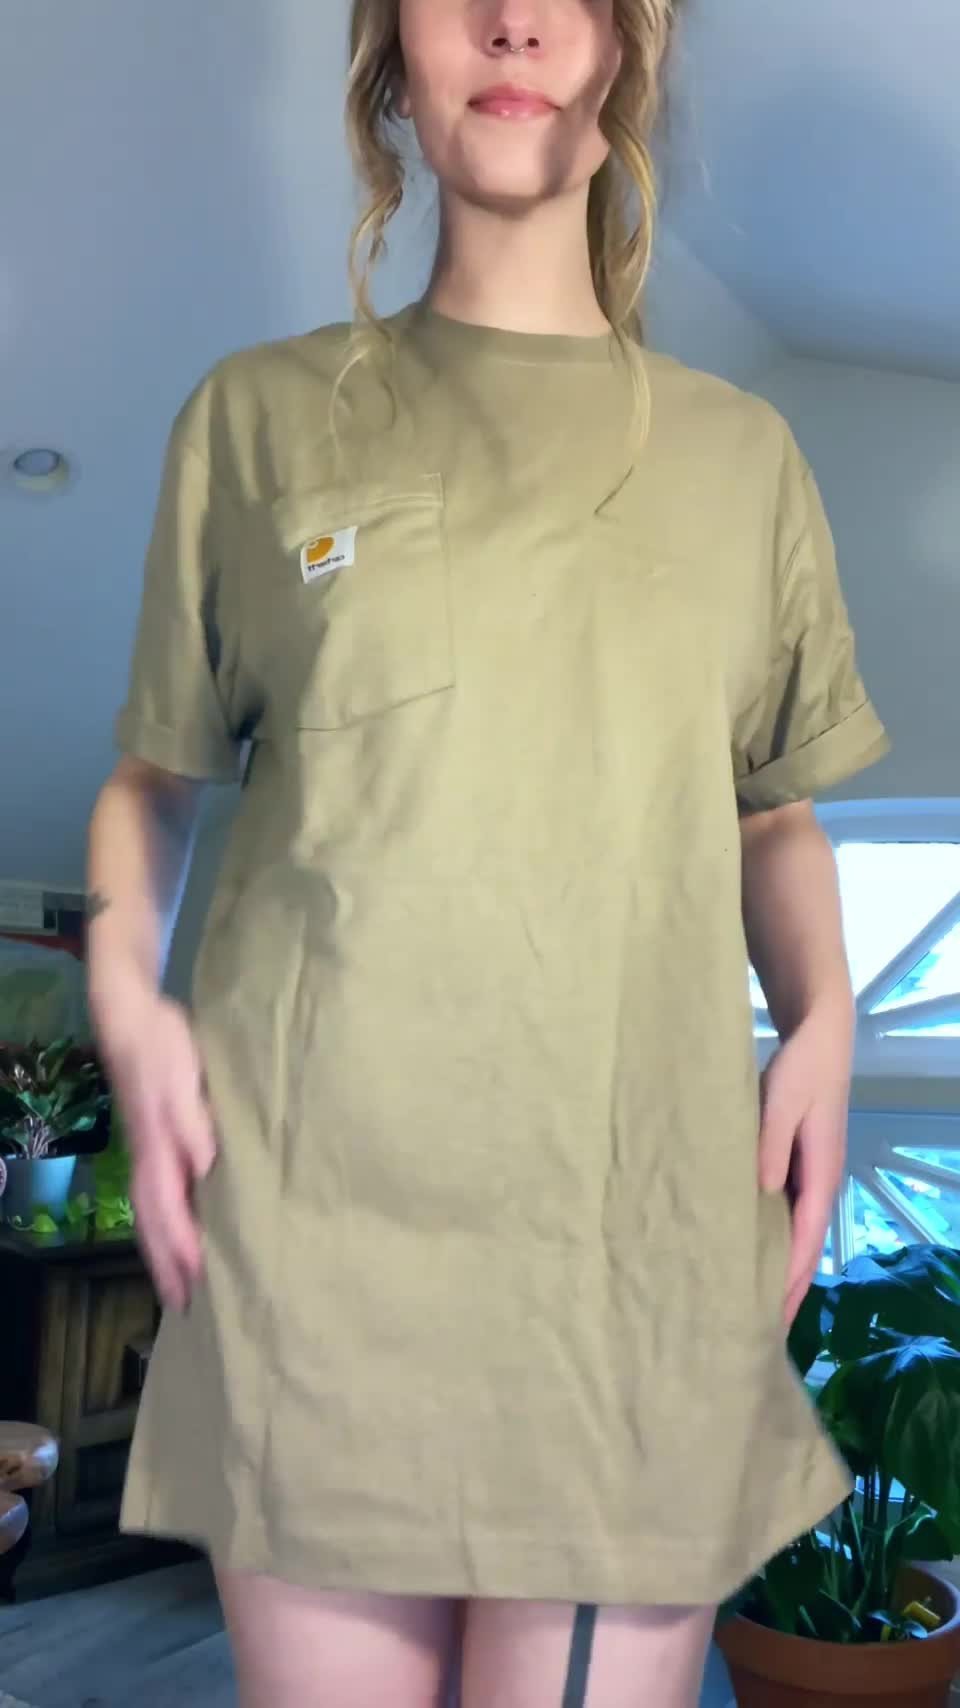 Video by bull21 with the username @bull21,  April 26, 2021 at 8:17 PM. The post is about the topic Teen and the text says 'The body under the big tee shirt'